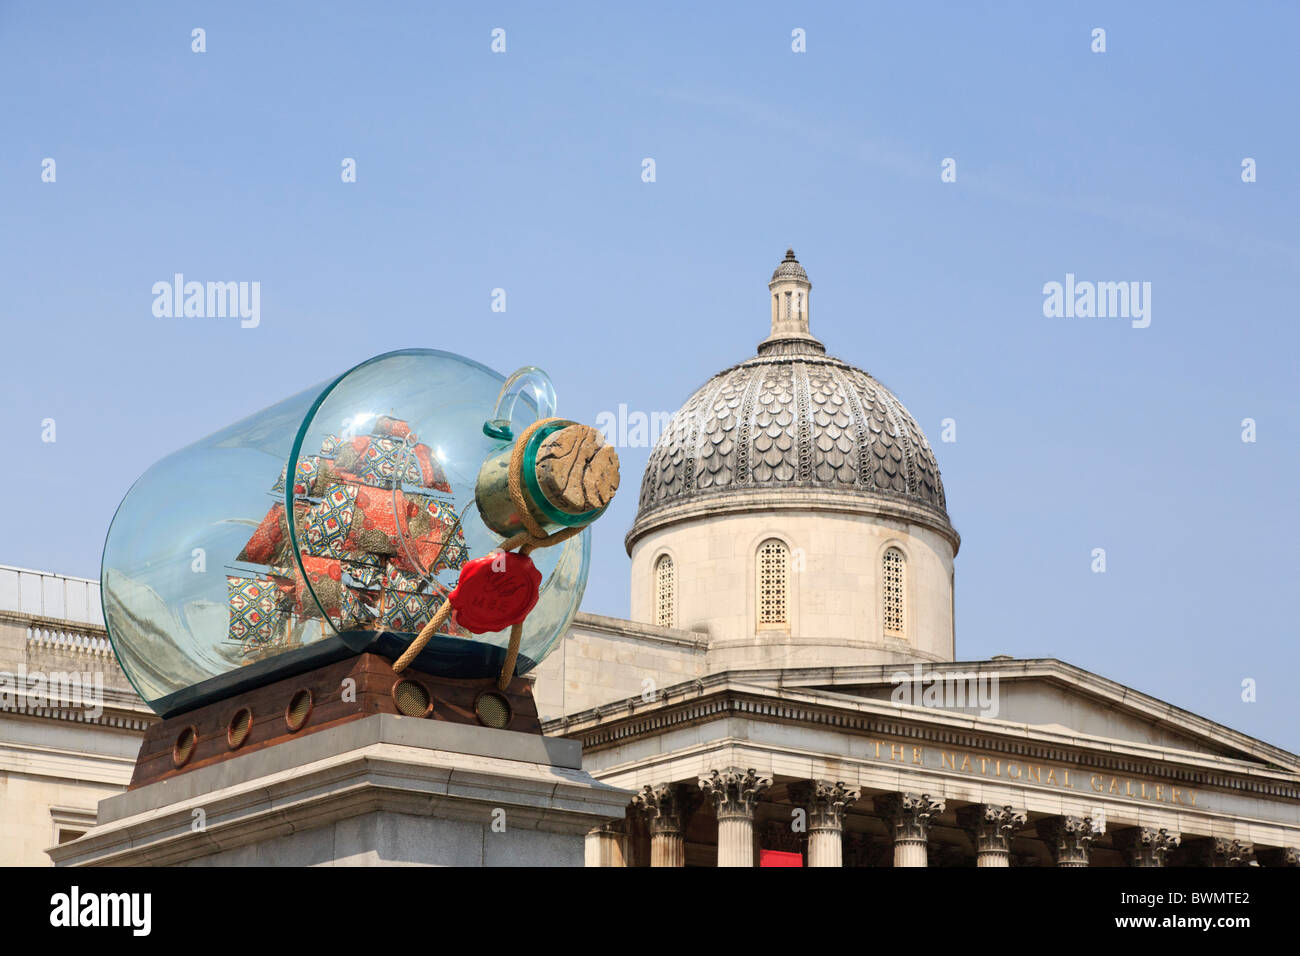 Nelson's Ship in a bottle by Yinka Shonibare on the 4th plinth in Trafalgar Square with the dome of the National Gallery Stock Photo